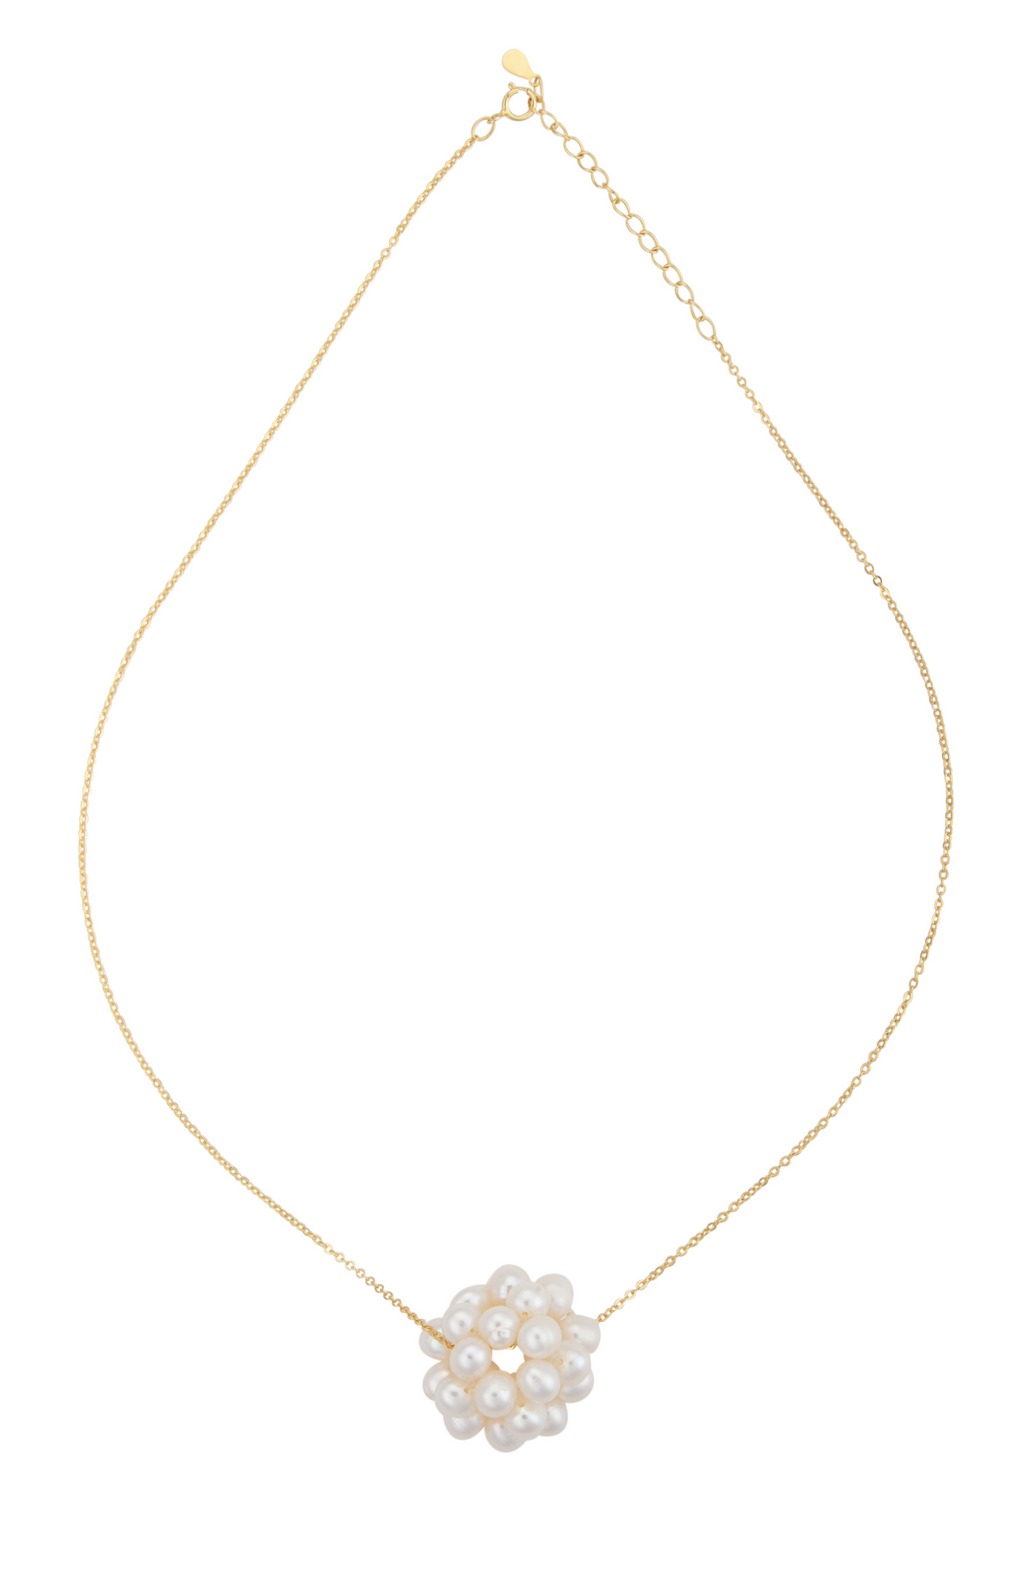 An image of a white snowball pearl cluster necklace on a gold chain